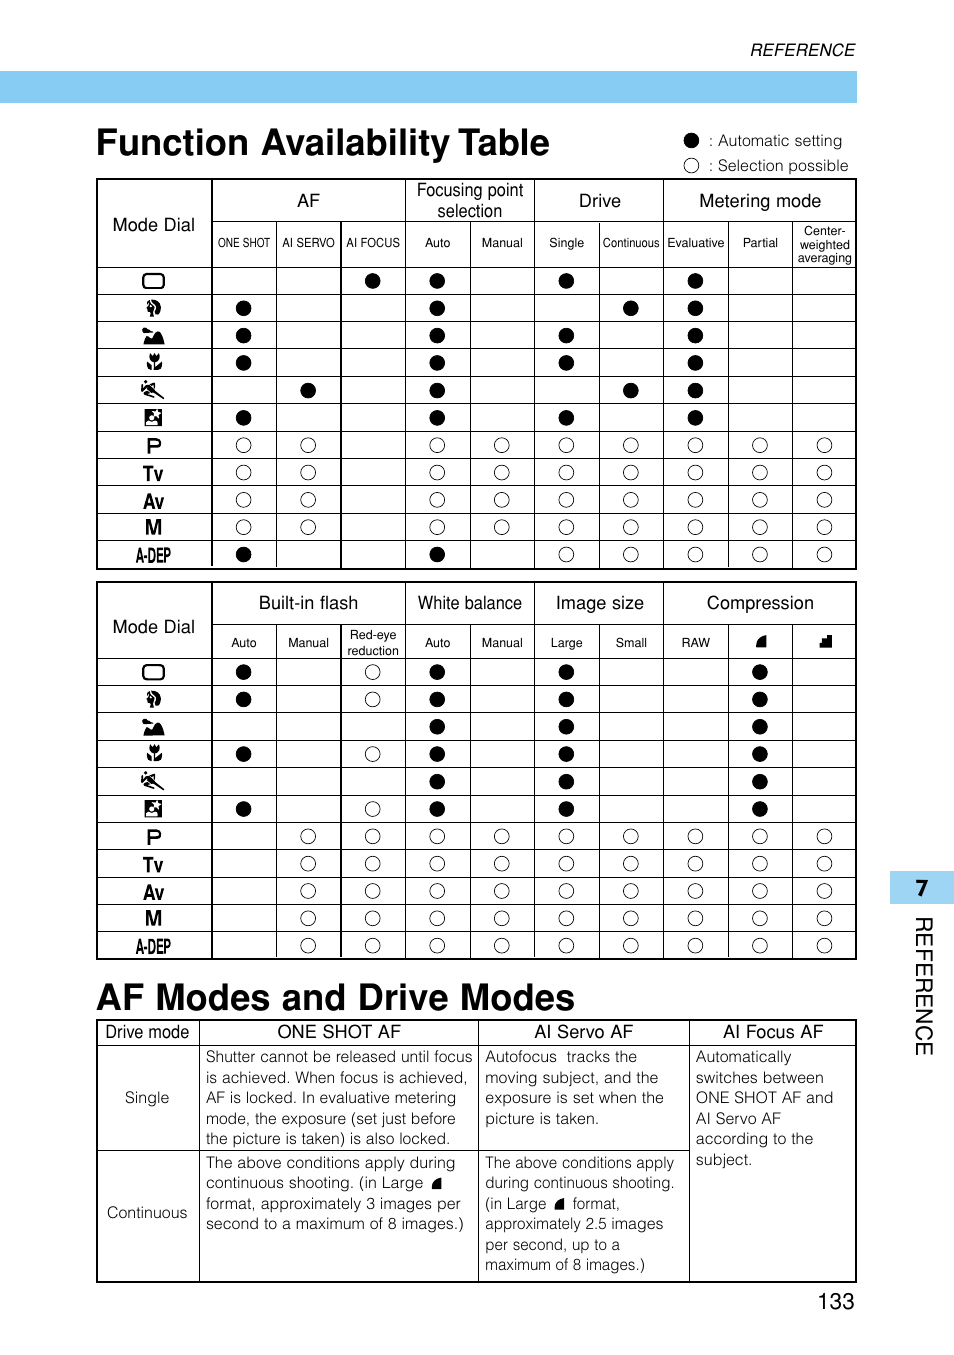 Function availability table, Af modes and drive modes, 7reference 133 | Canon EOS D30 User Manual | Page 133 / 152